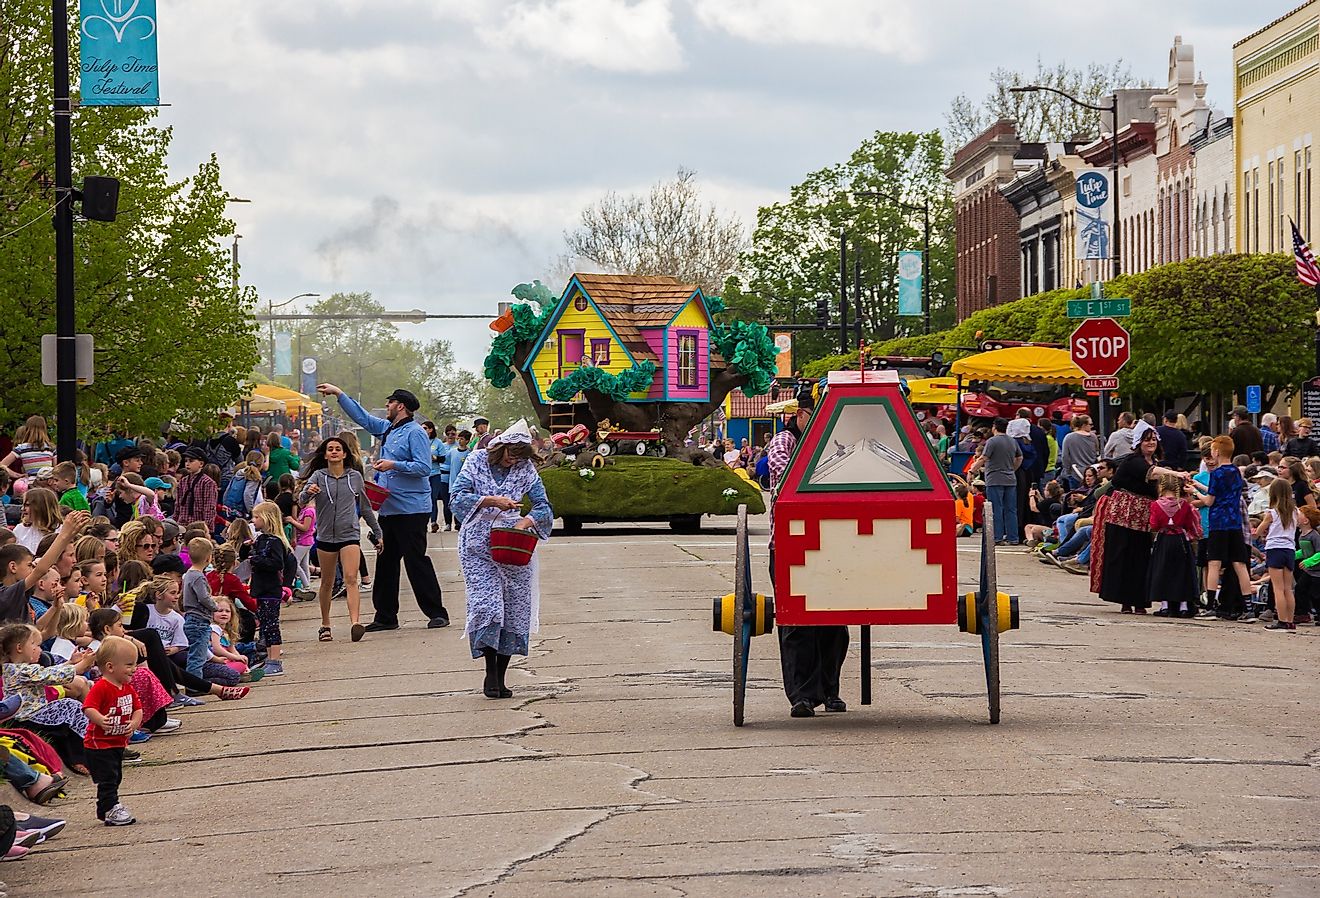 Tulip Time Festival Parade of Pella's dutch community, a festival dedicated to the citizens who immigrated from the Netherlands to America. Image credit yosmoes815 via Shutterstock